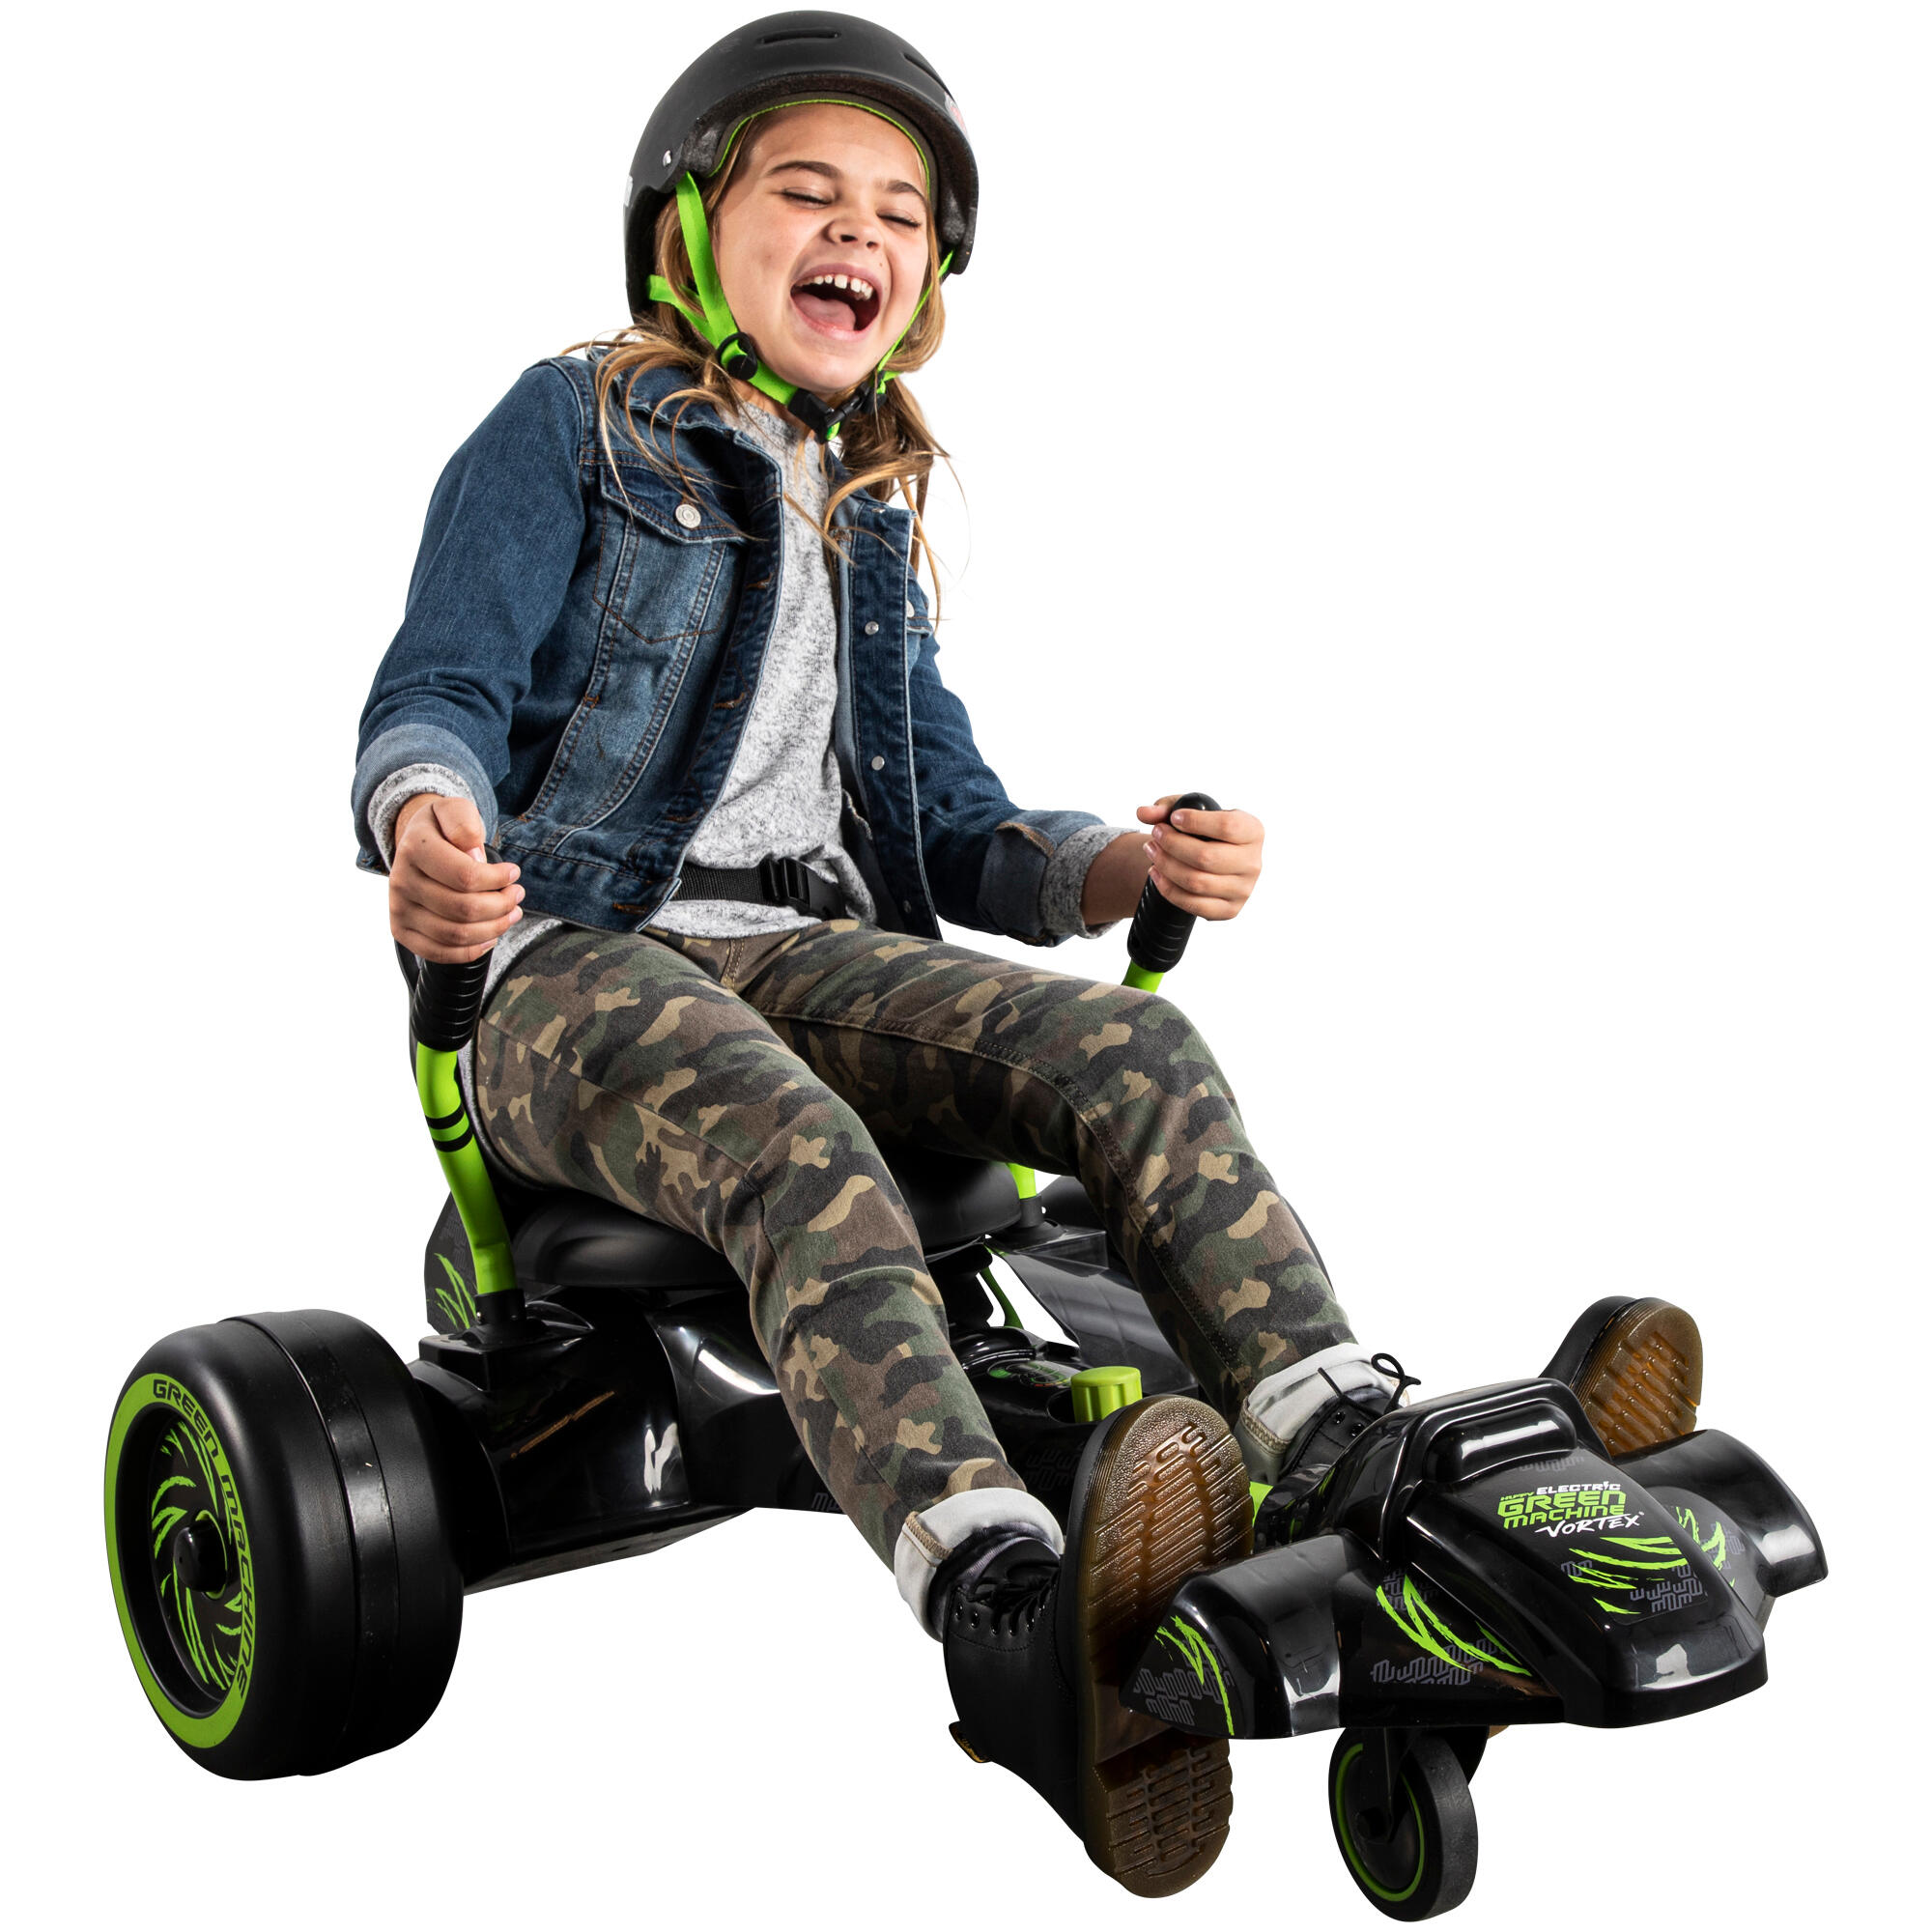 HUFFY Huffy Green Machine Vortex - 12v Electric Ride On 360 Spin Action